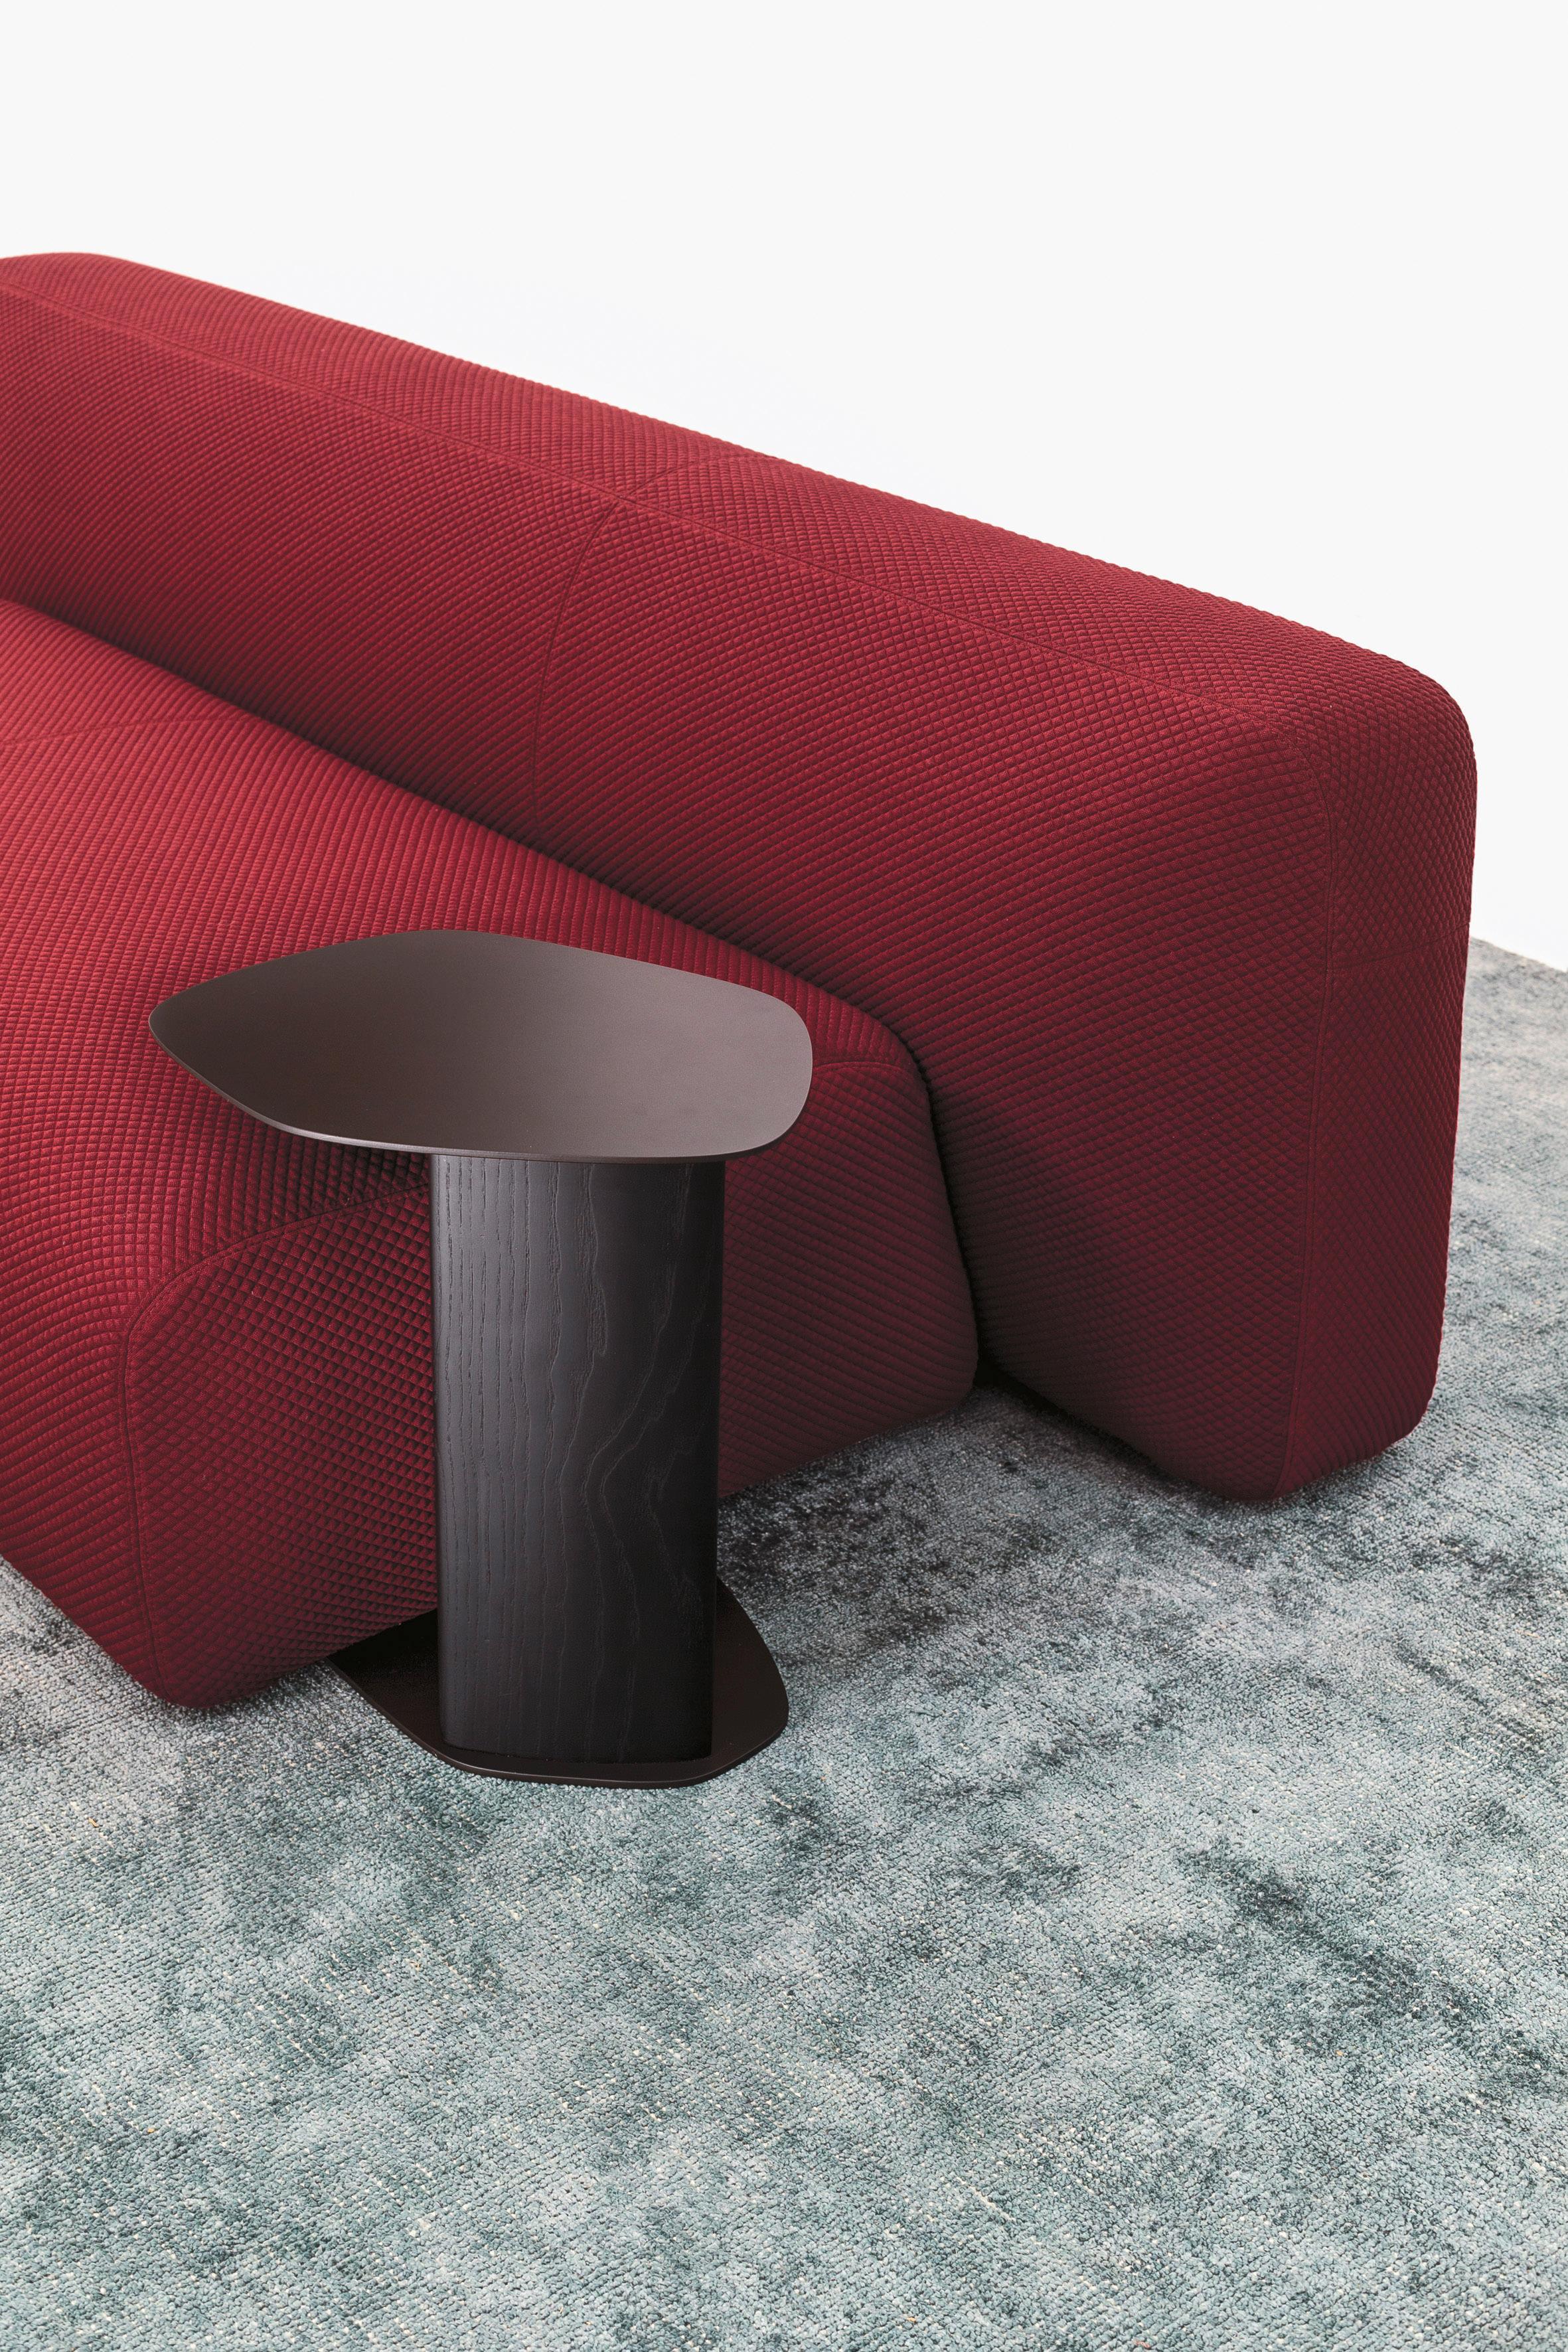 Keisho is another creation that is inspired by natural and organic forms. Originally conceived to complement the Suiseki collection, this table has developed into the ideal accessory for all LaCividina sofas. As its name suggests, the origins of its